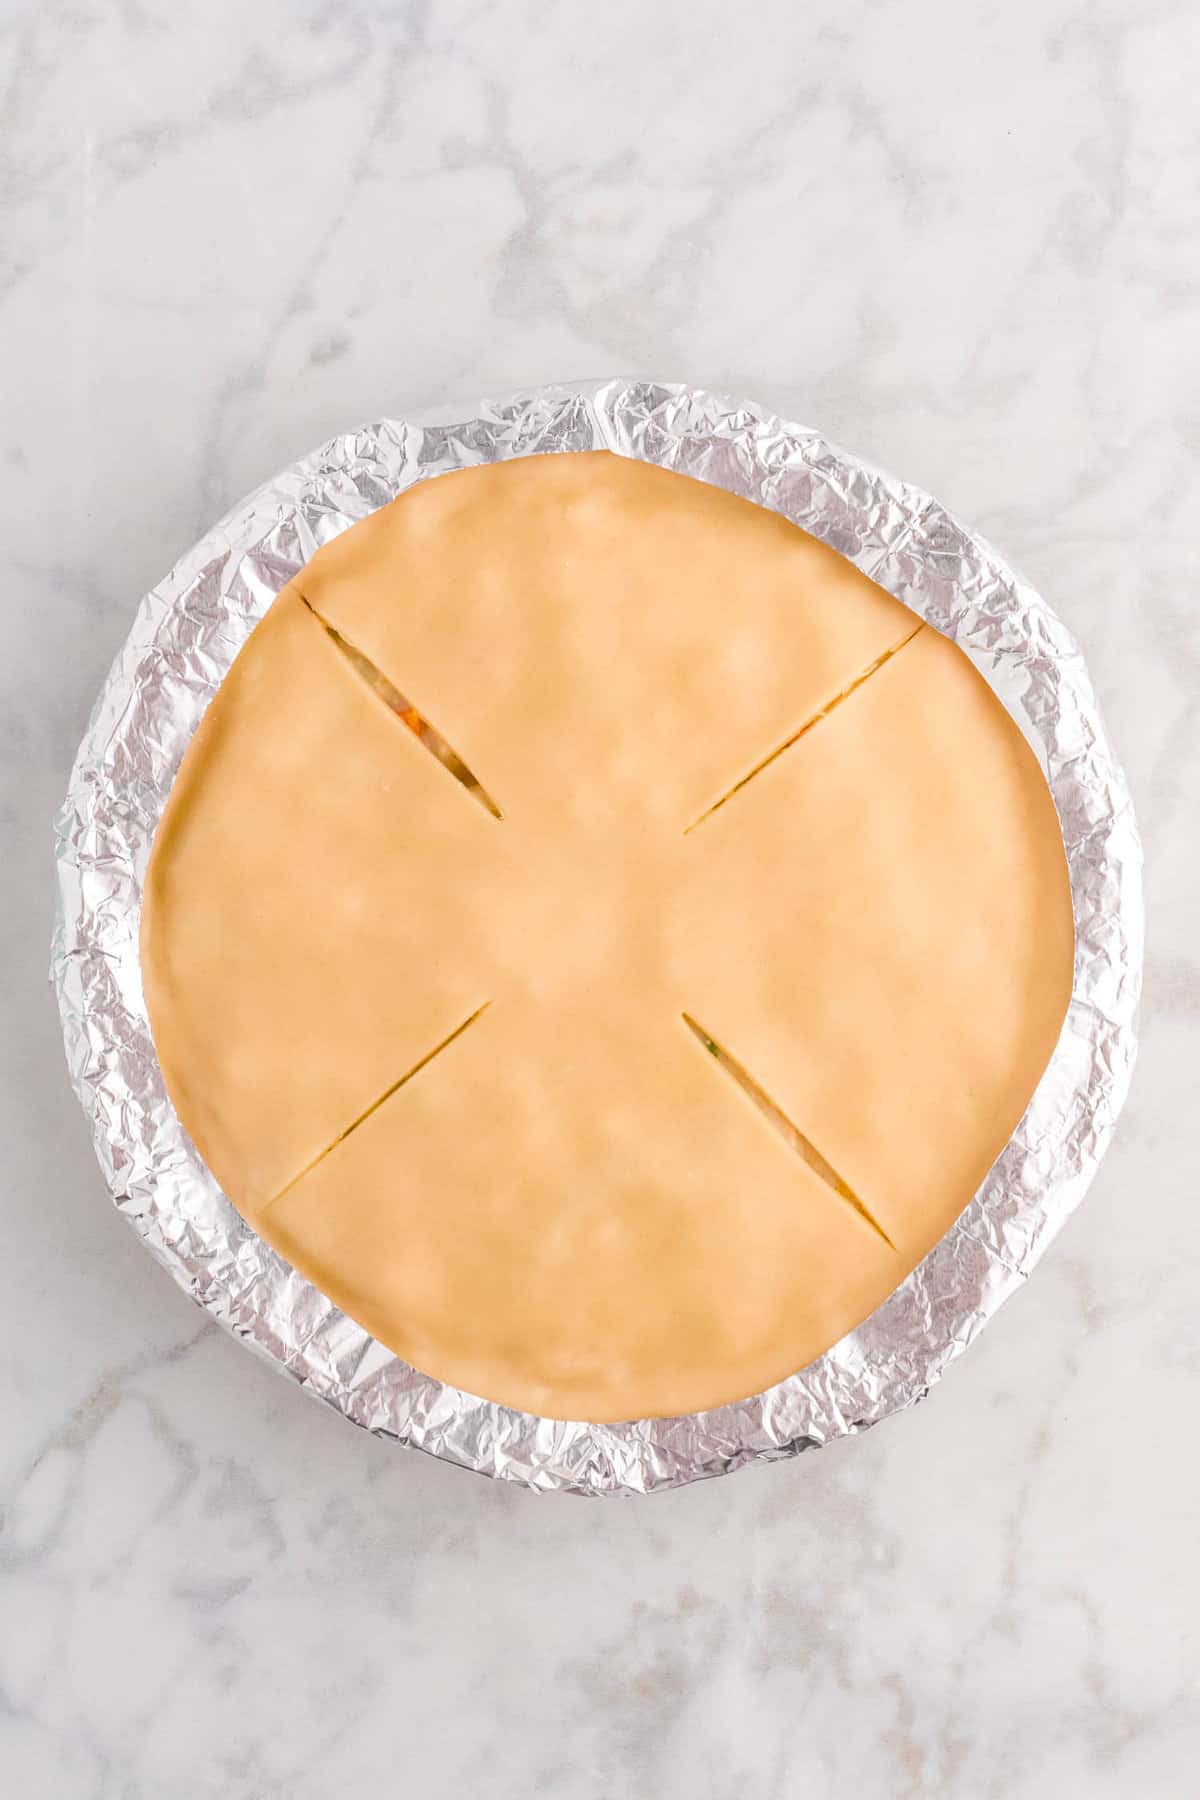 Overhead Image of Oven-Ready Chicken Pot Pie with Tin Foil Covering Crust Edge